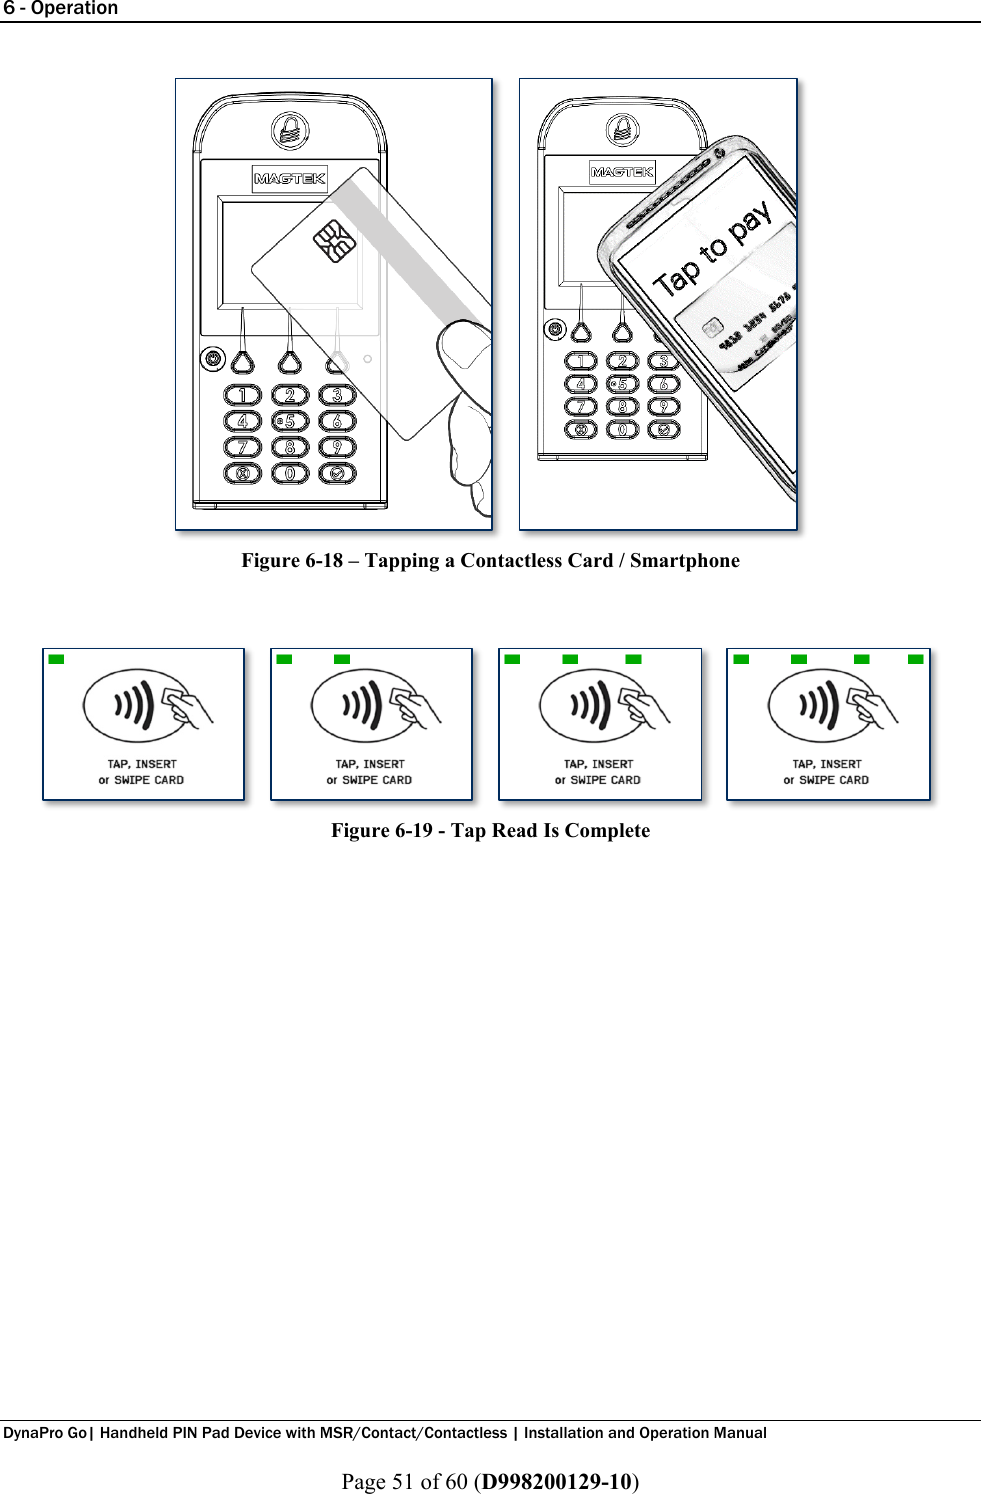 6 - Operation  DynaPro Go| Handheld PIN Pad Device with MSR/Contact/Contactless | Installation and Operation Manual  Page 51 of 60 (D998200129-10)  Figure 6-18 – Tapping a Contactless Card / Smartphone   Figure 6-19 - Tap Read Is Complete     